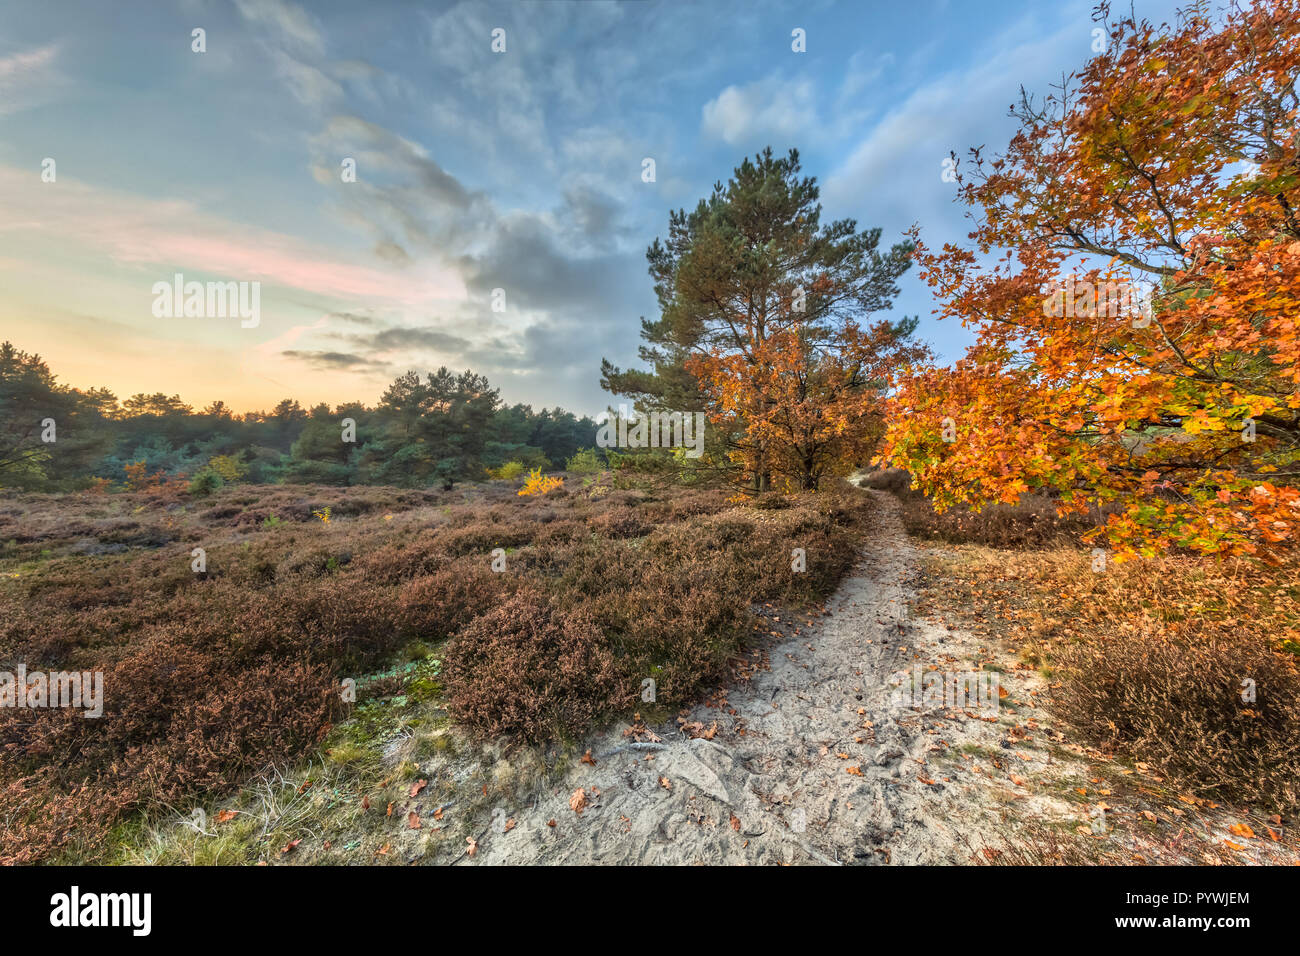 Path through Autumn heathland landscape with colorful leaves on trees in Drenthe, Netherlands Stock Photo